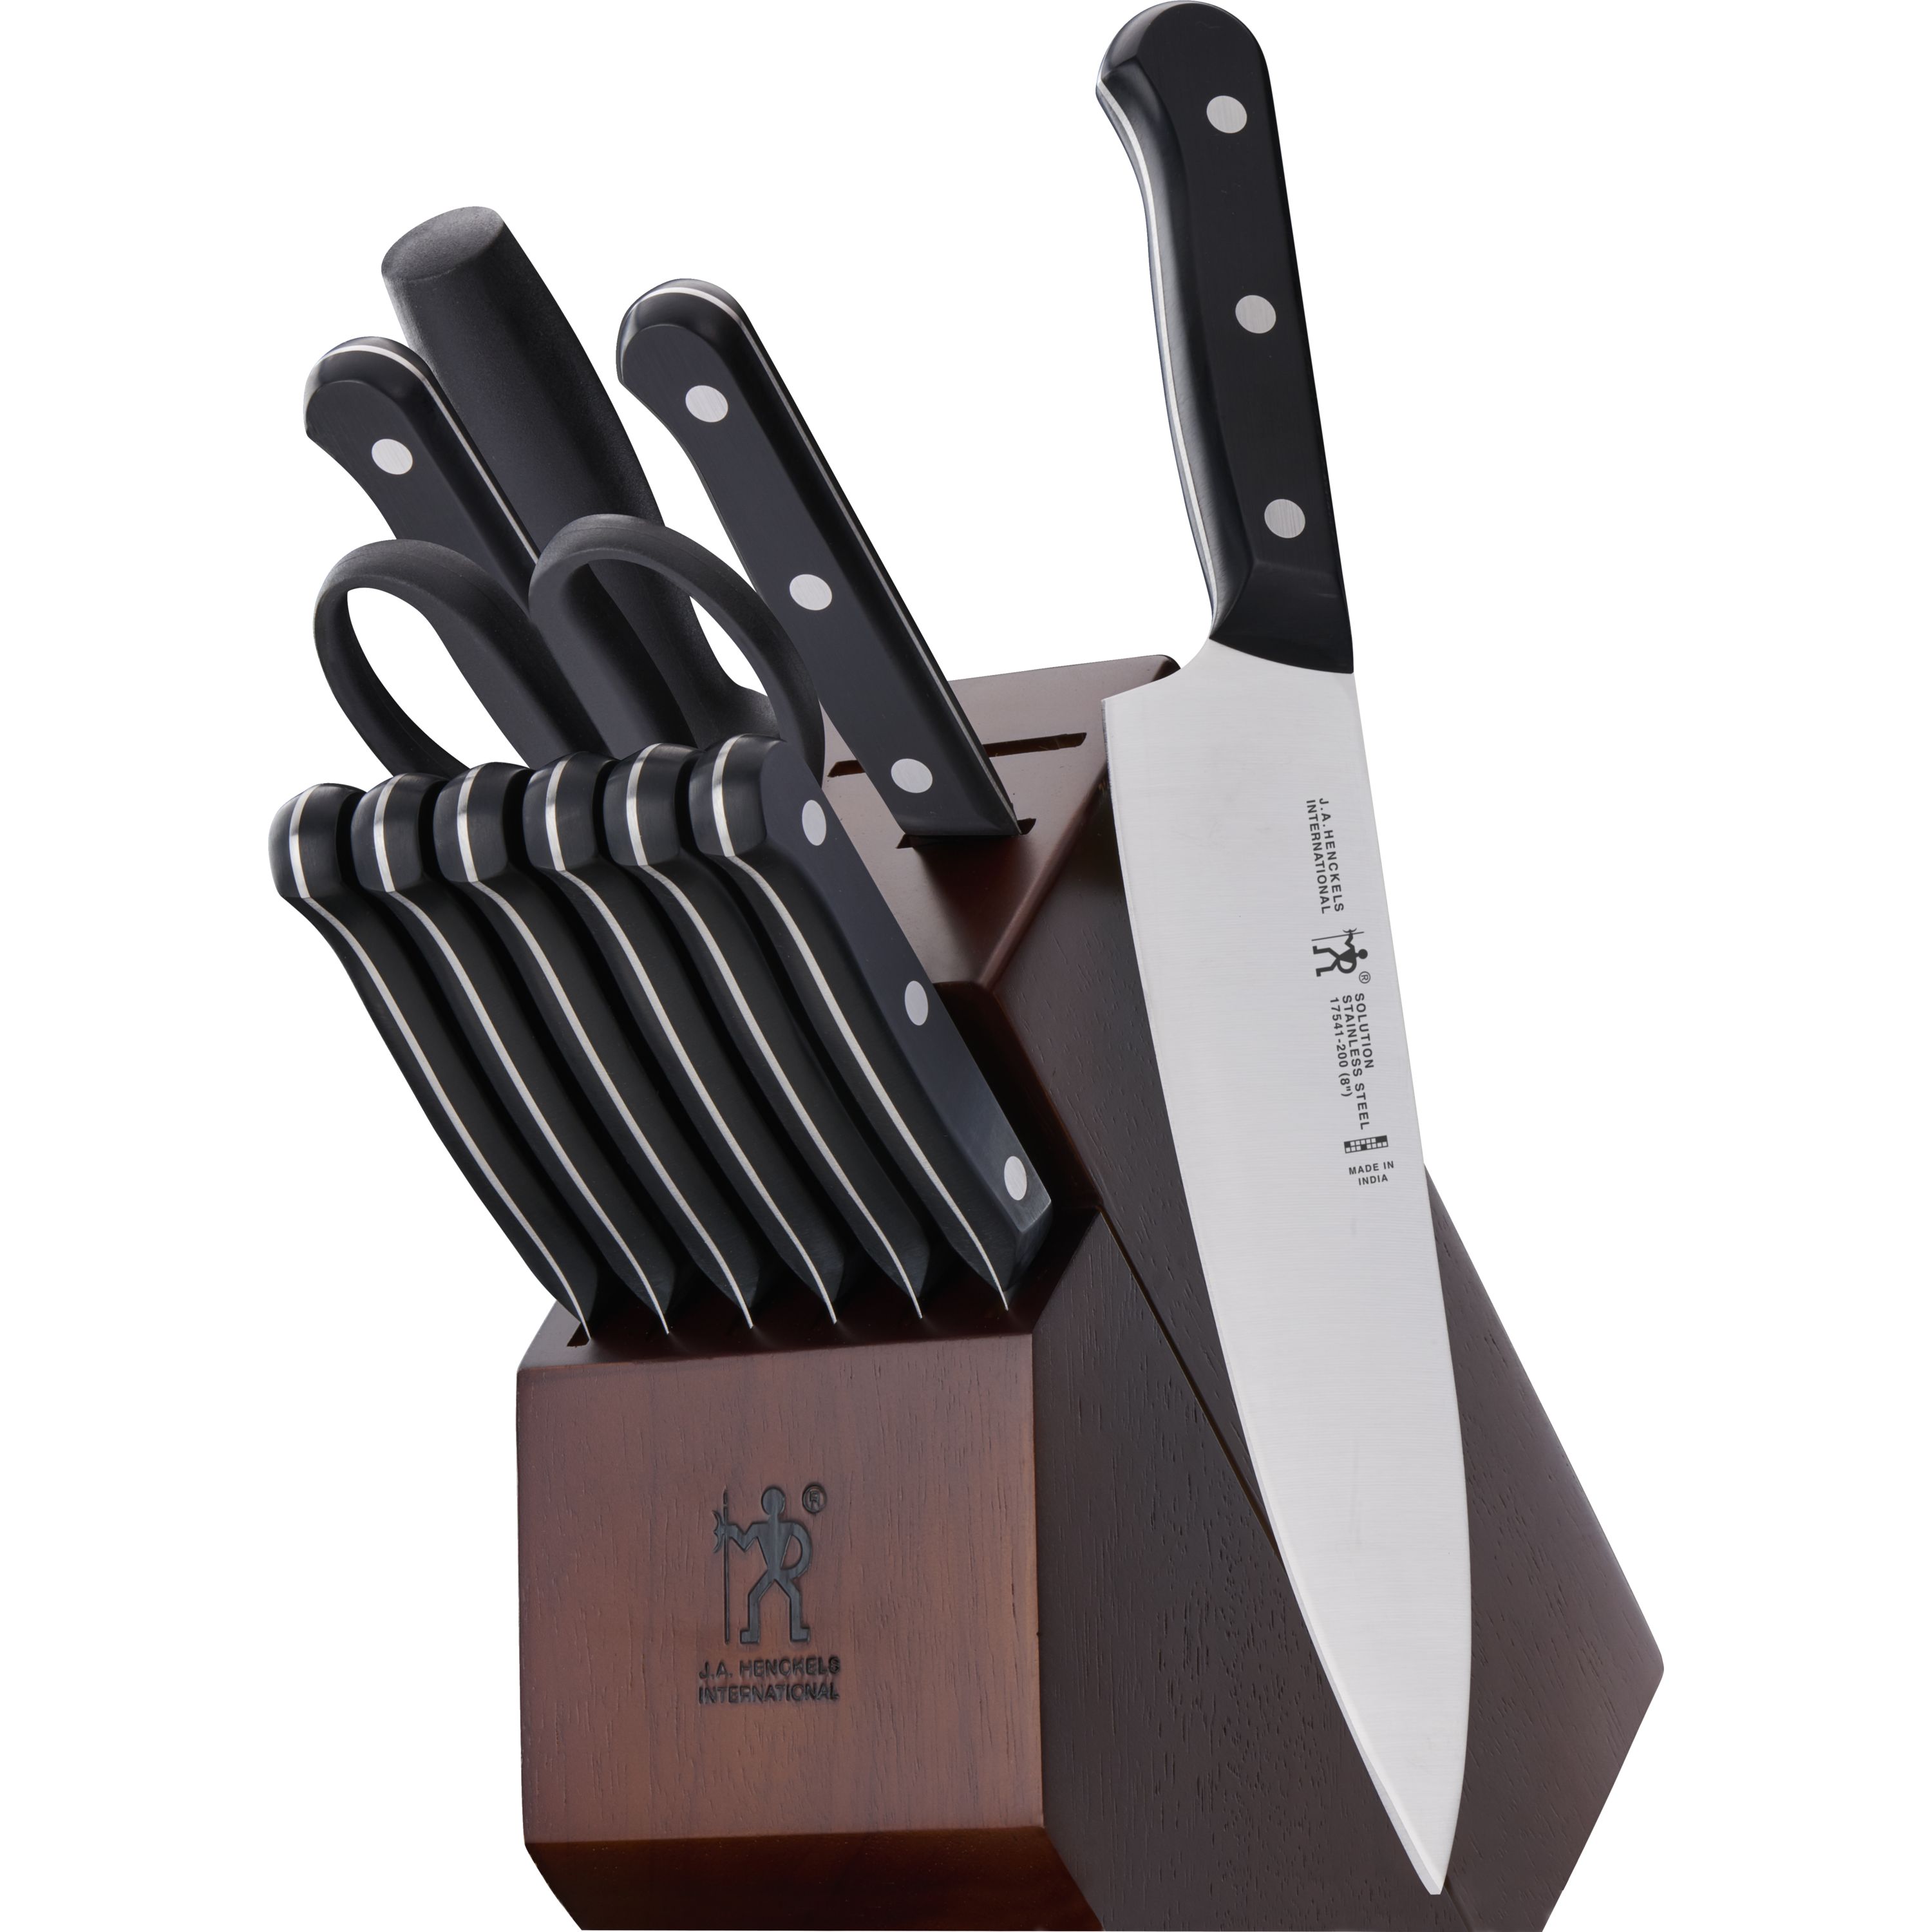 Zwilling J.A. Henckels International Statement 12-pc Knife Block Set -  Stainless Steel Blades, Plastic Handles, Dishwasher Safe in the Cutlery  department at